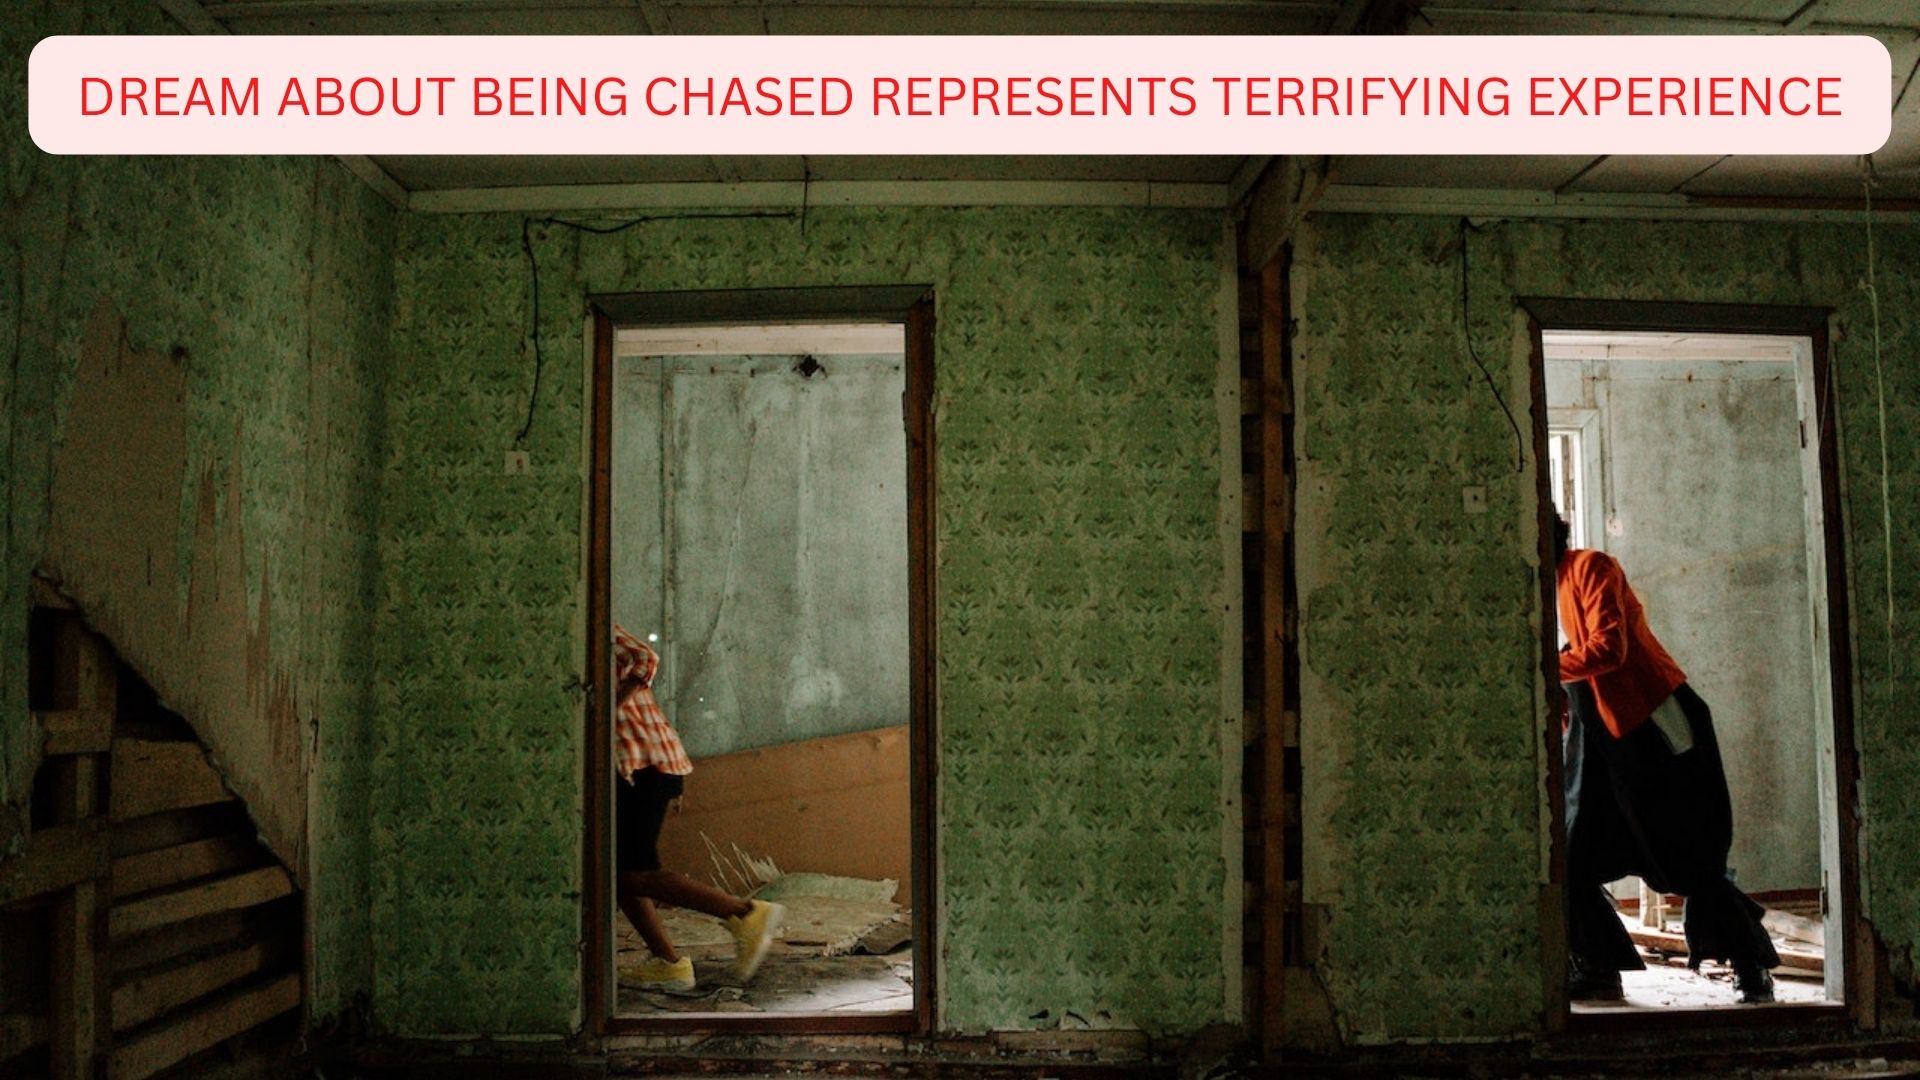 Dream About Being Chased - Represents Terrifying Experience